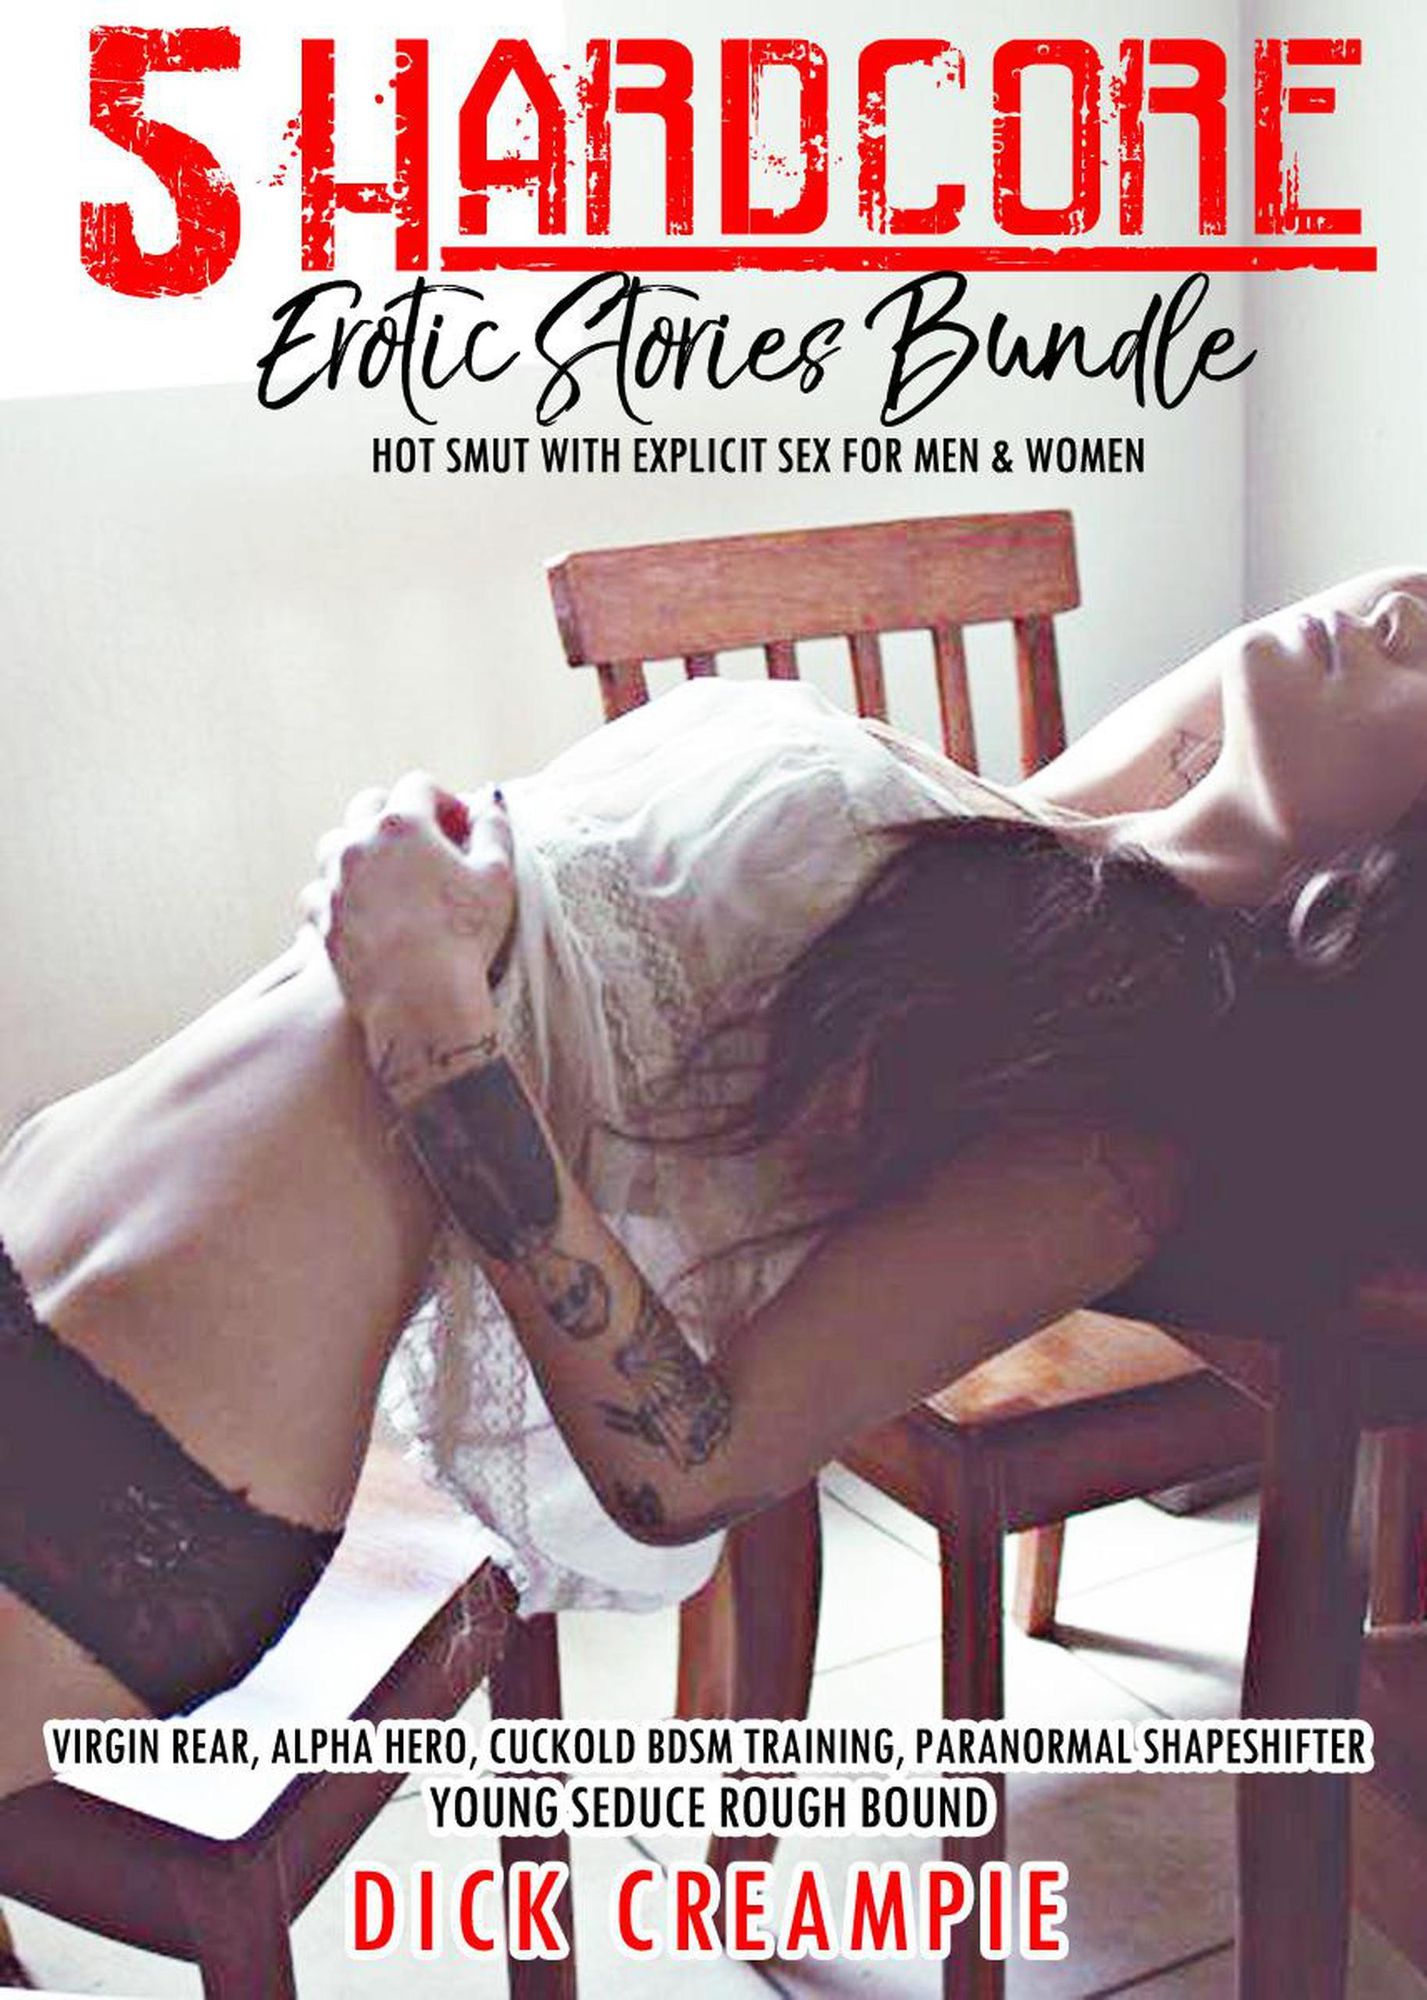 5 Hardcore Erotic Stories Bundle - Hot Smut with Explicit Sex for Men and Women - Virgin Rear, Alpha Hero, Cuckold BDSM Training, Paranormal Shapeshifte von Dick Creampie picture